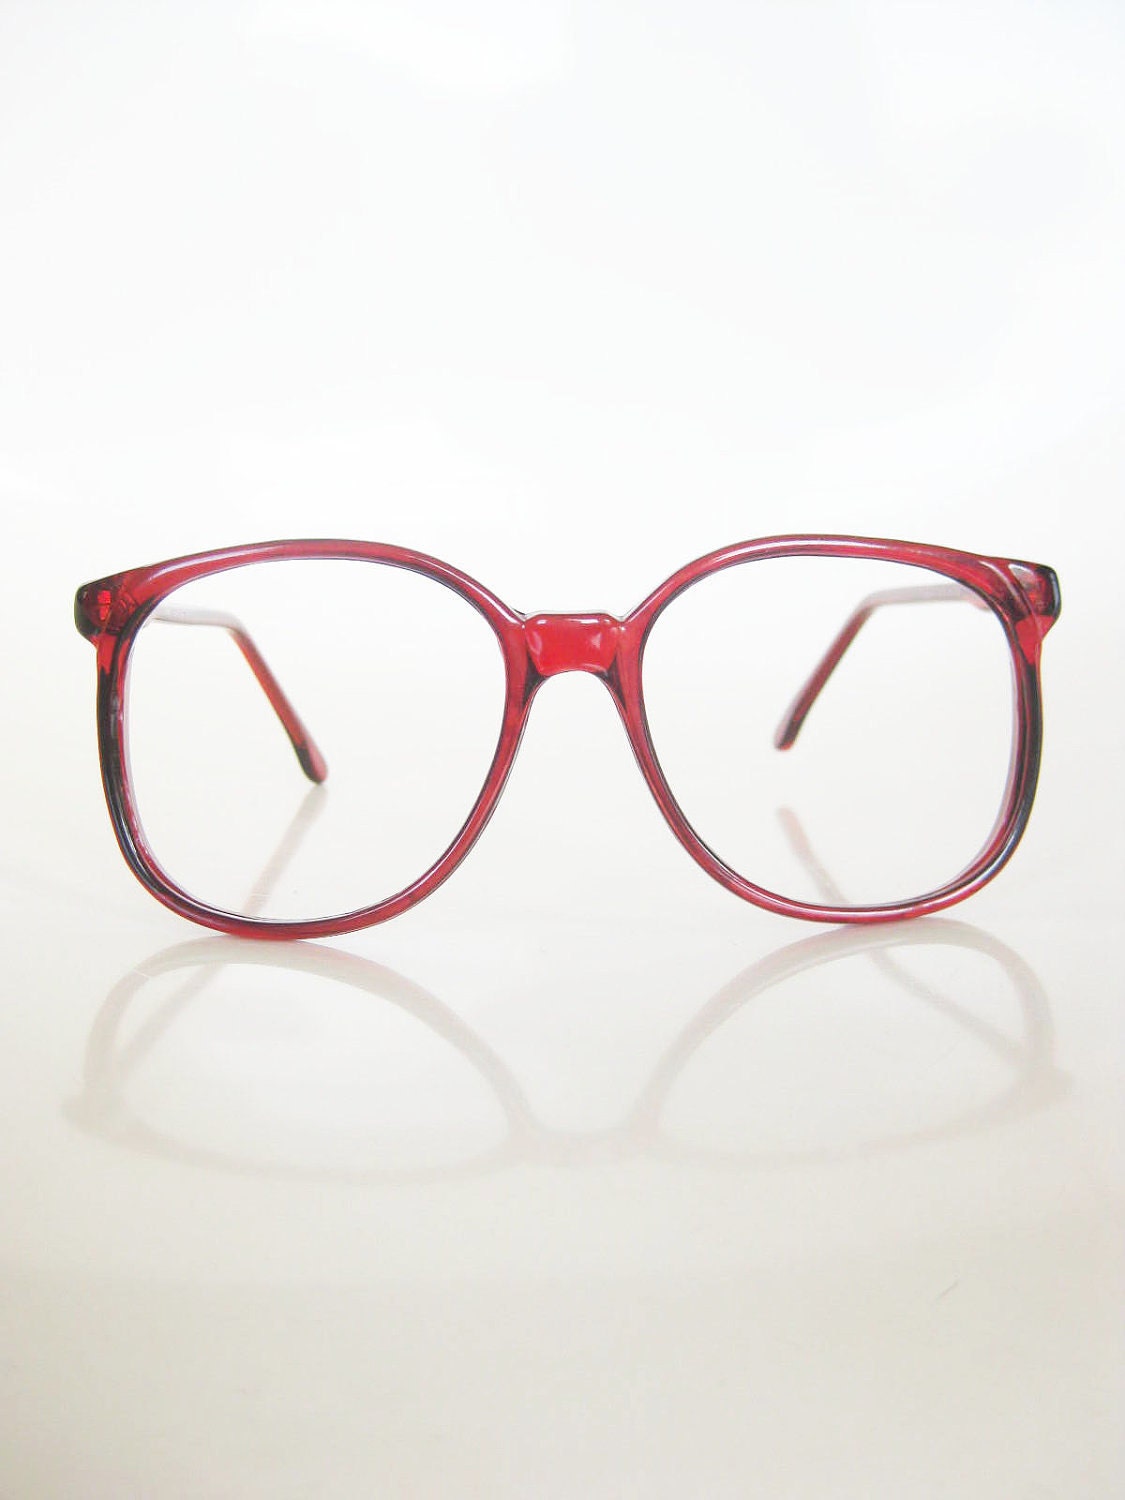 Vintage Cranberry Round Eyeglasses Red Clear 1980s 80s